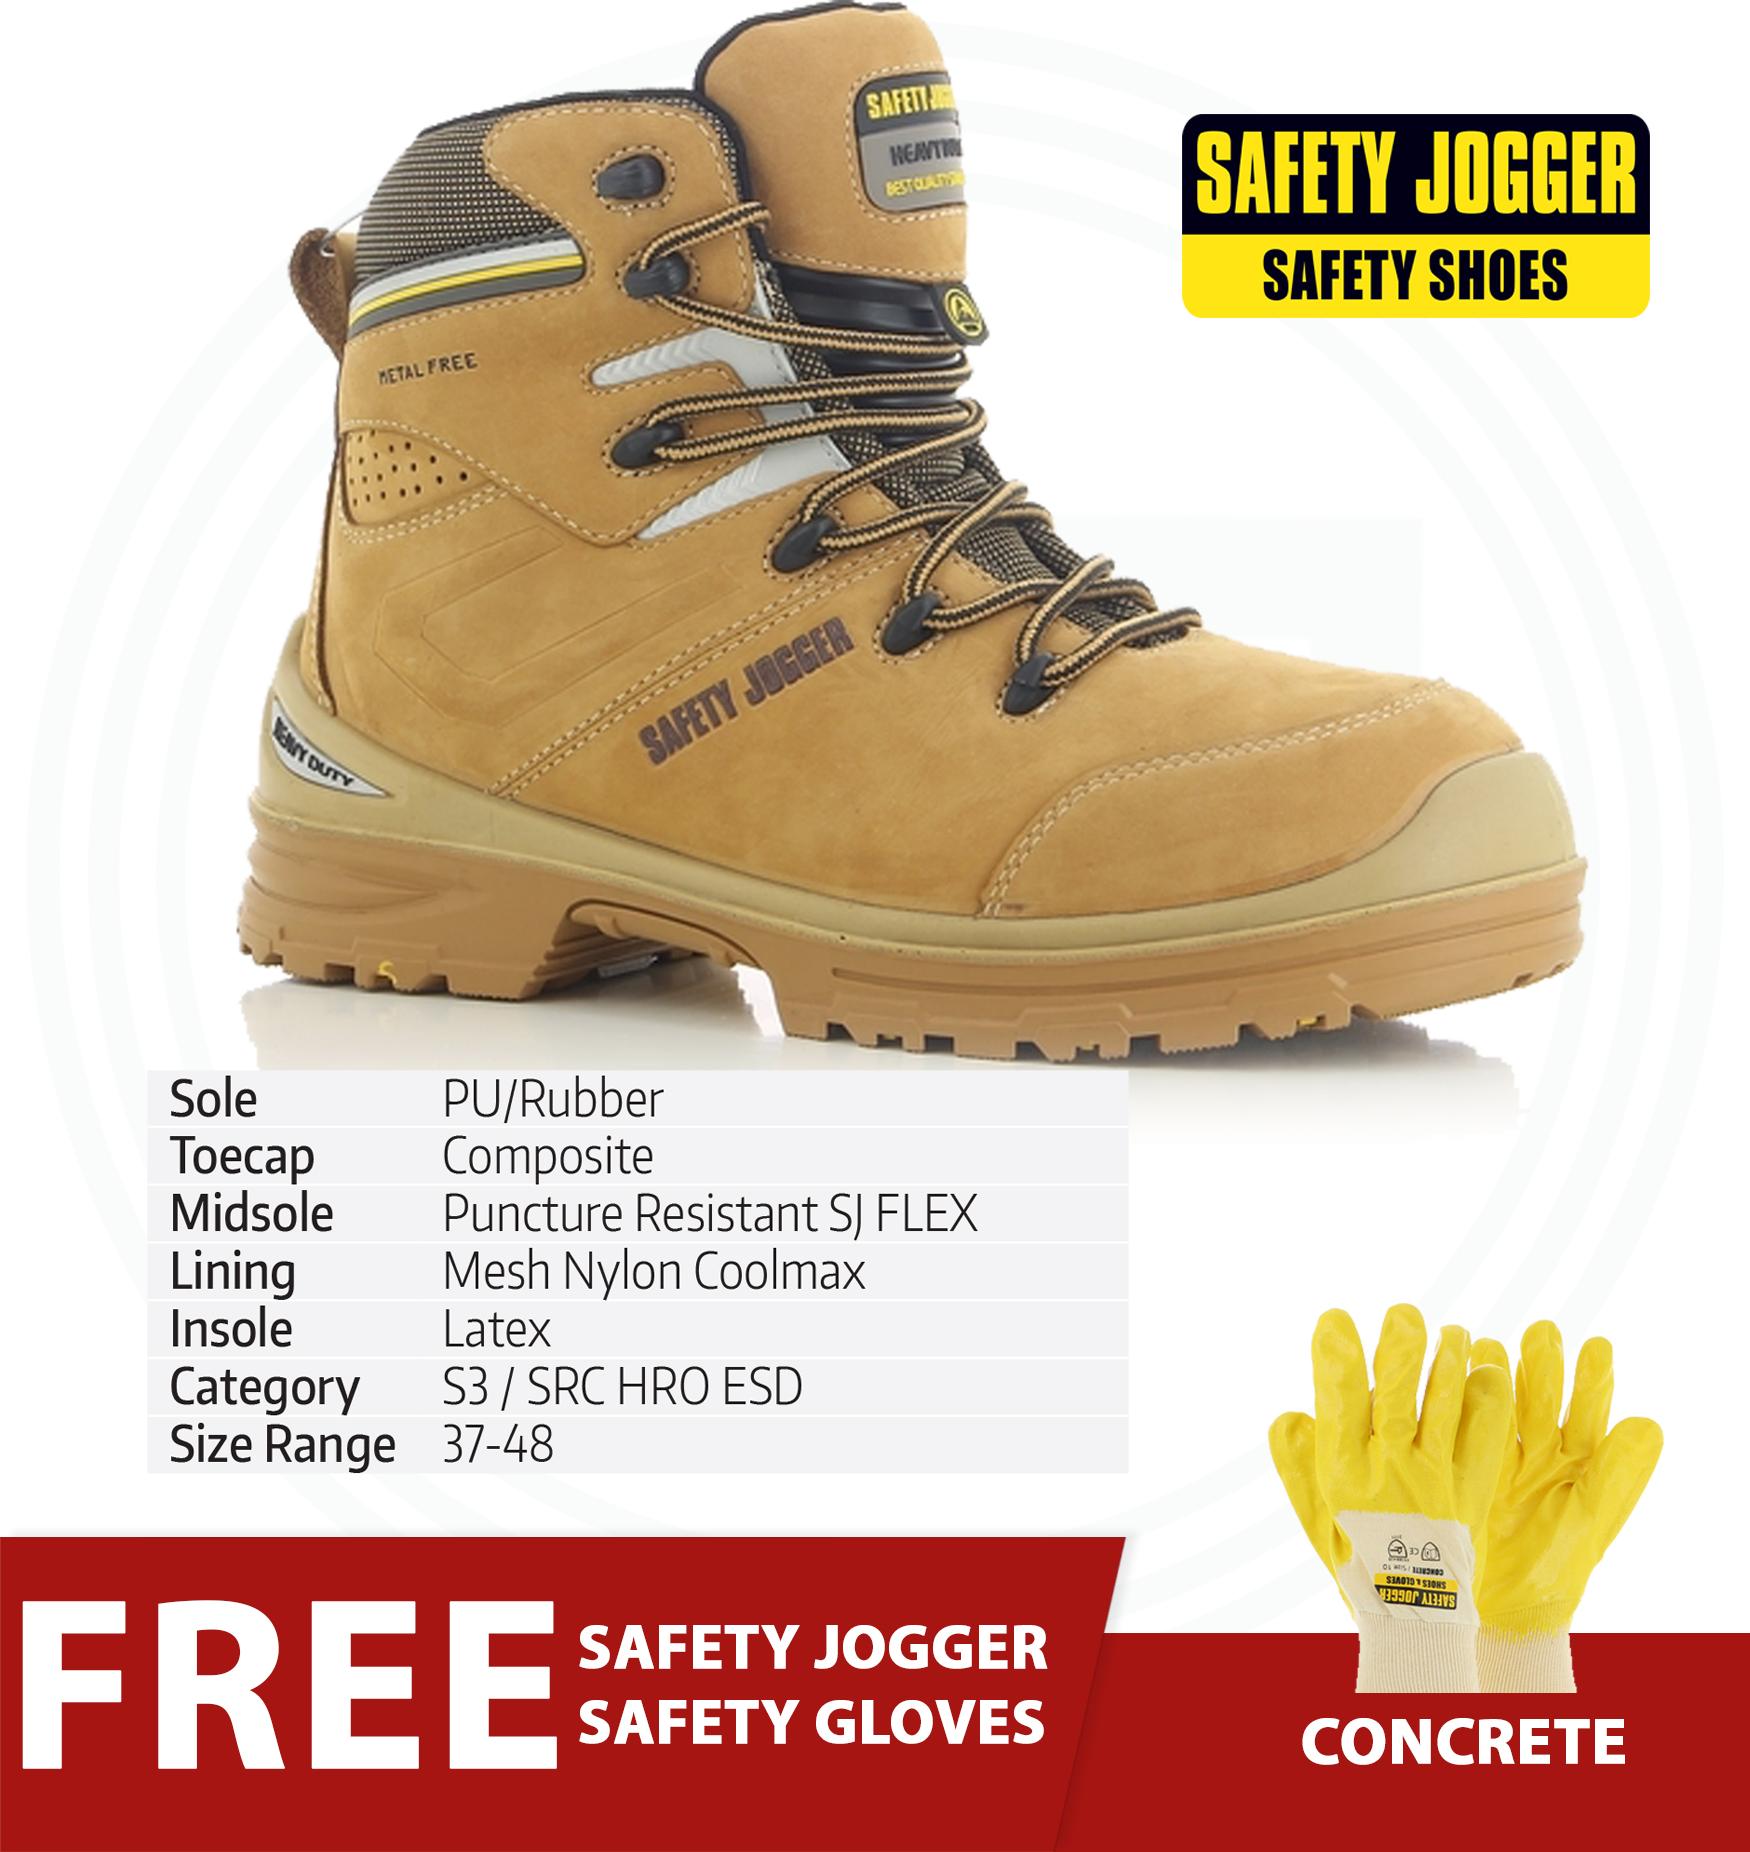 Safety Jogger ULTIMA S3 Safety Shoes 